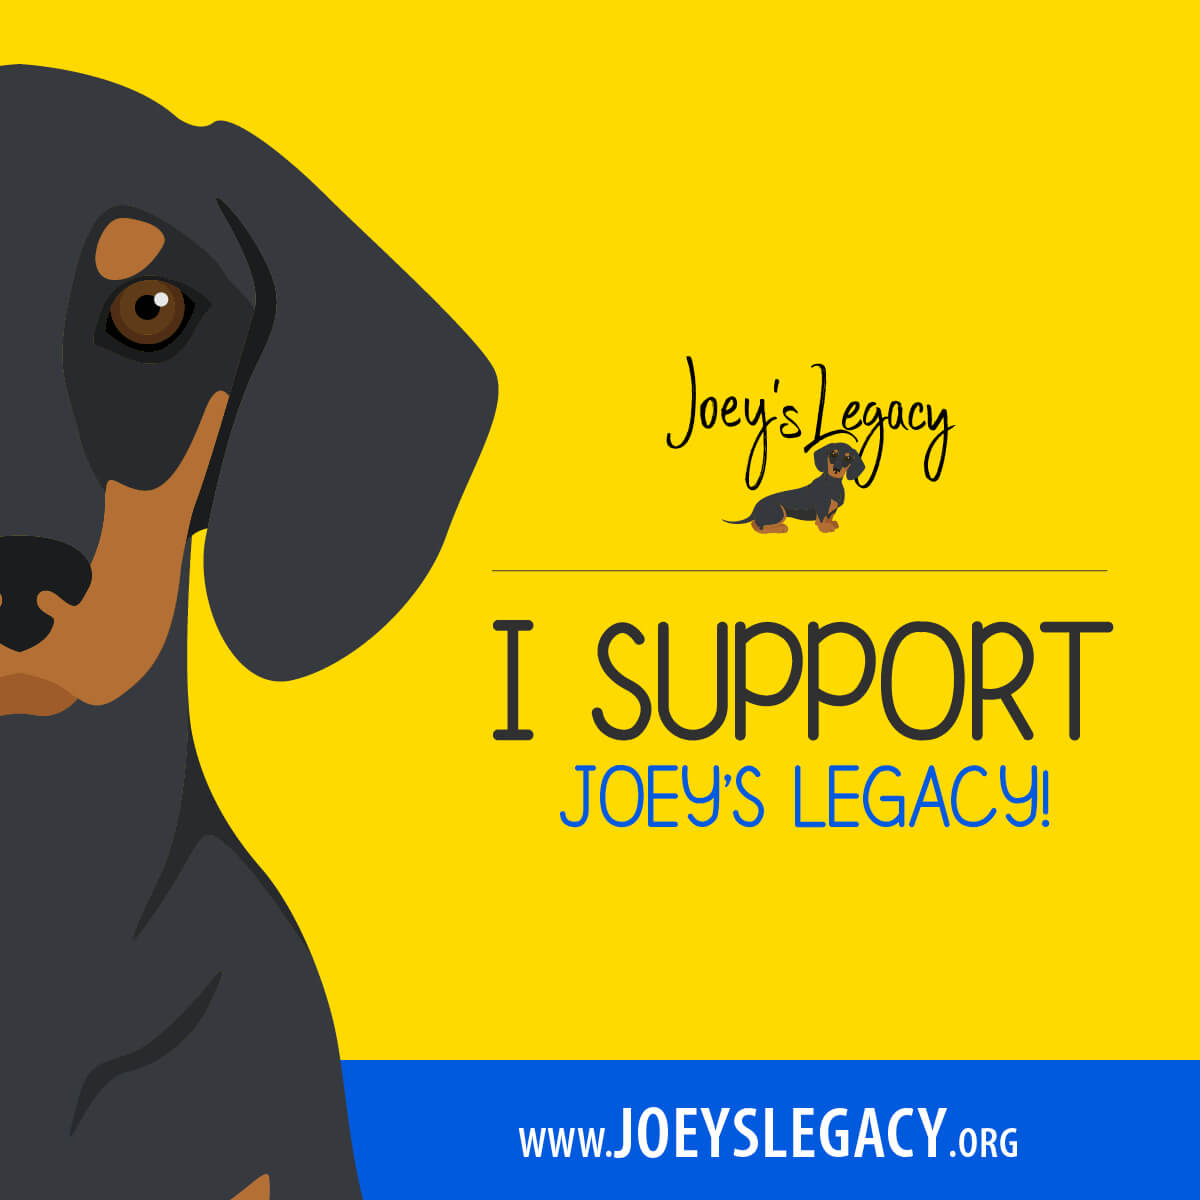 Joey's Legacy Social Media Post I support Joey's Legacy